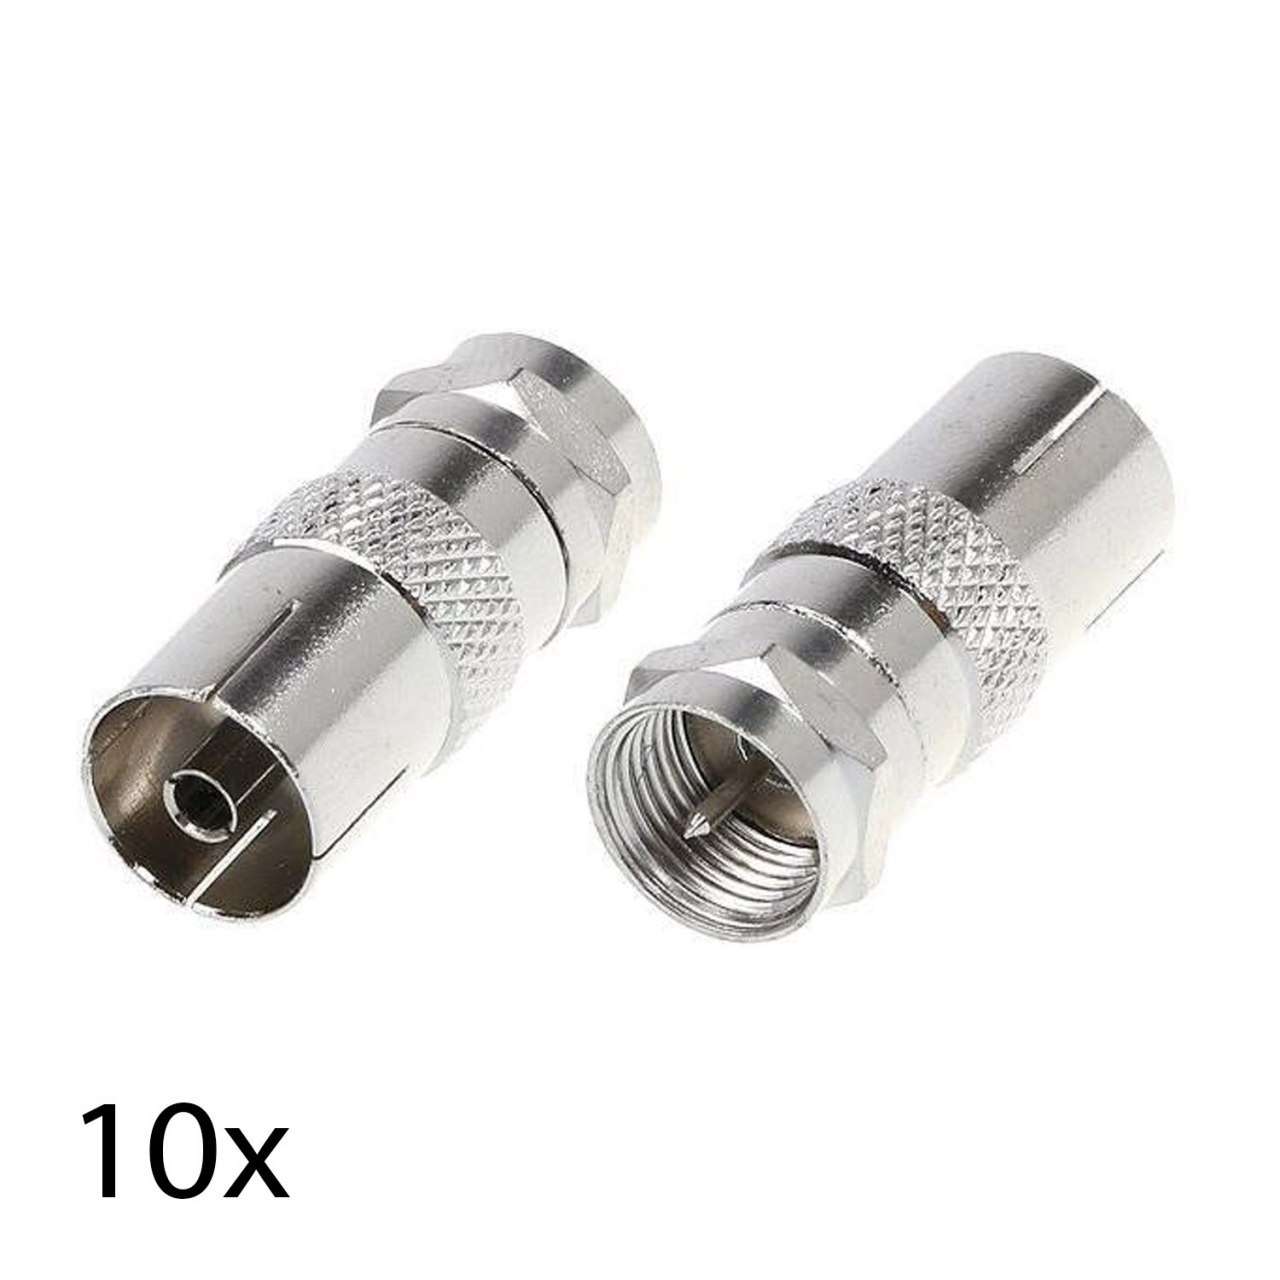 1 result for 10 Female Coaxial RF TV Jack to F type Male Plug Connector Adapter SKY Saorview